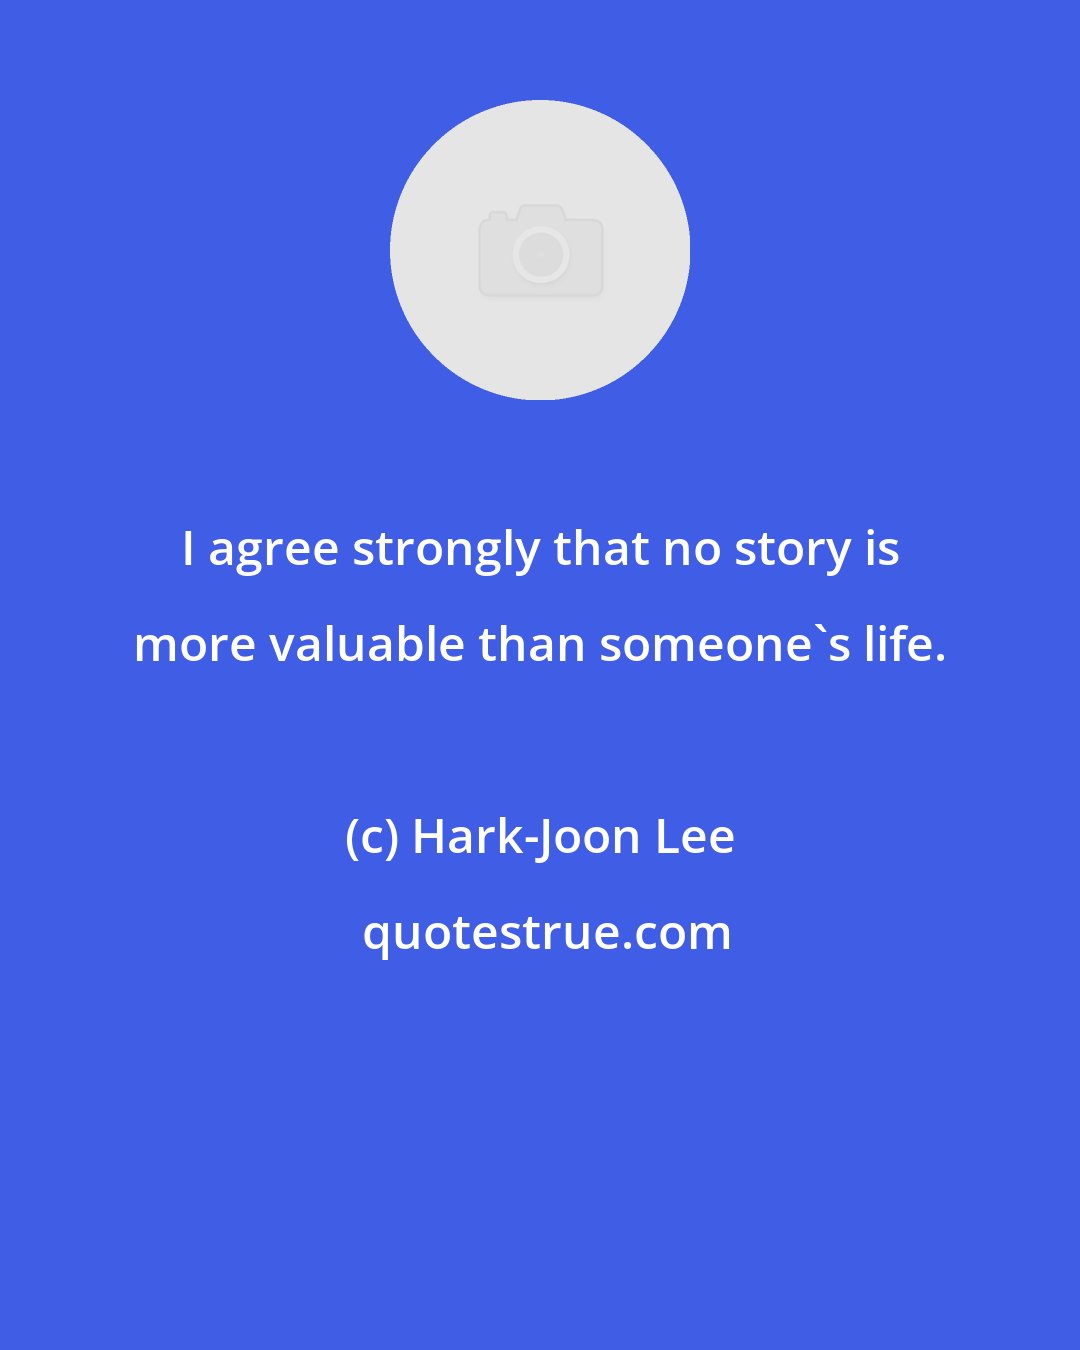 Hark-Joon Lee: I agree strongly that no story is more valuable than someone's life.